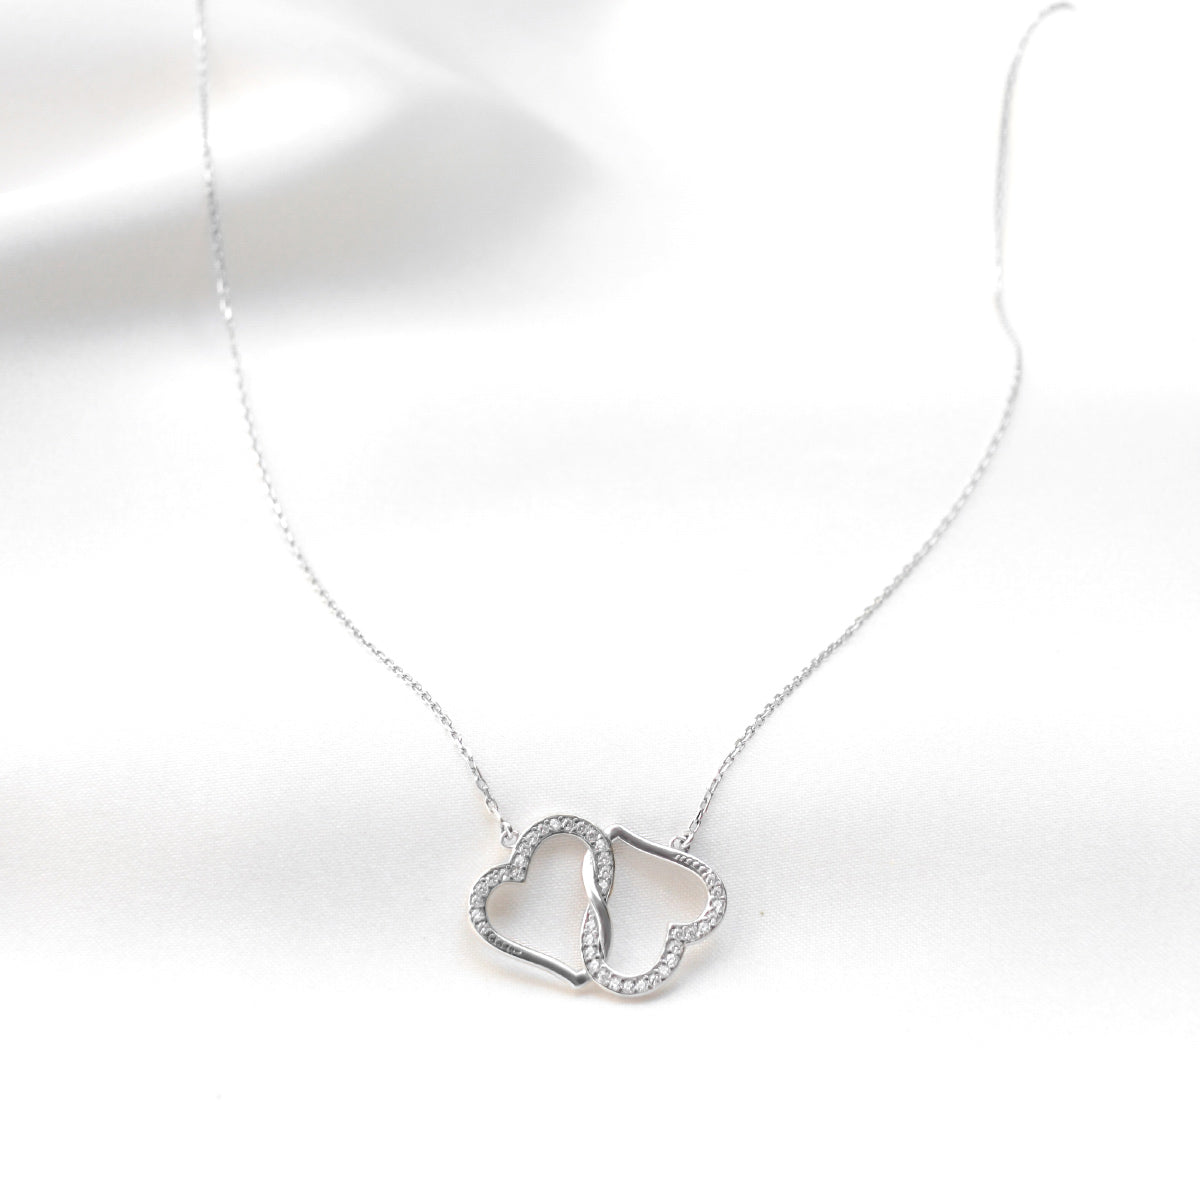 Mother & Son, the Love Between - Joined Hearts Silver Necklace Gift Set